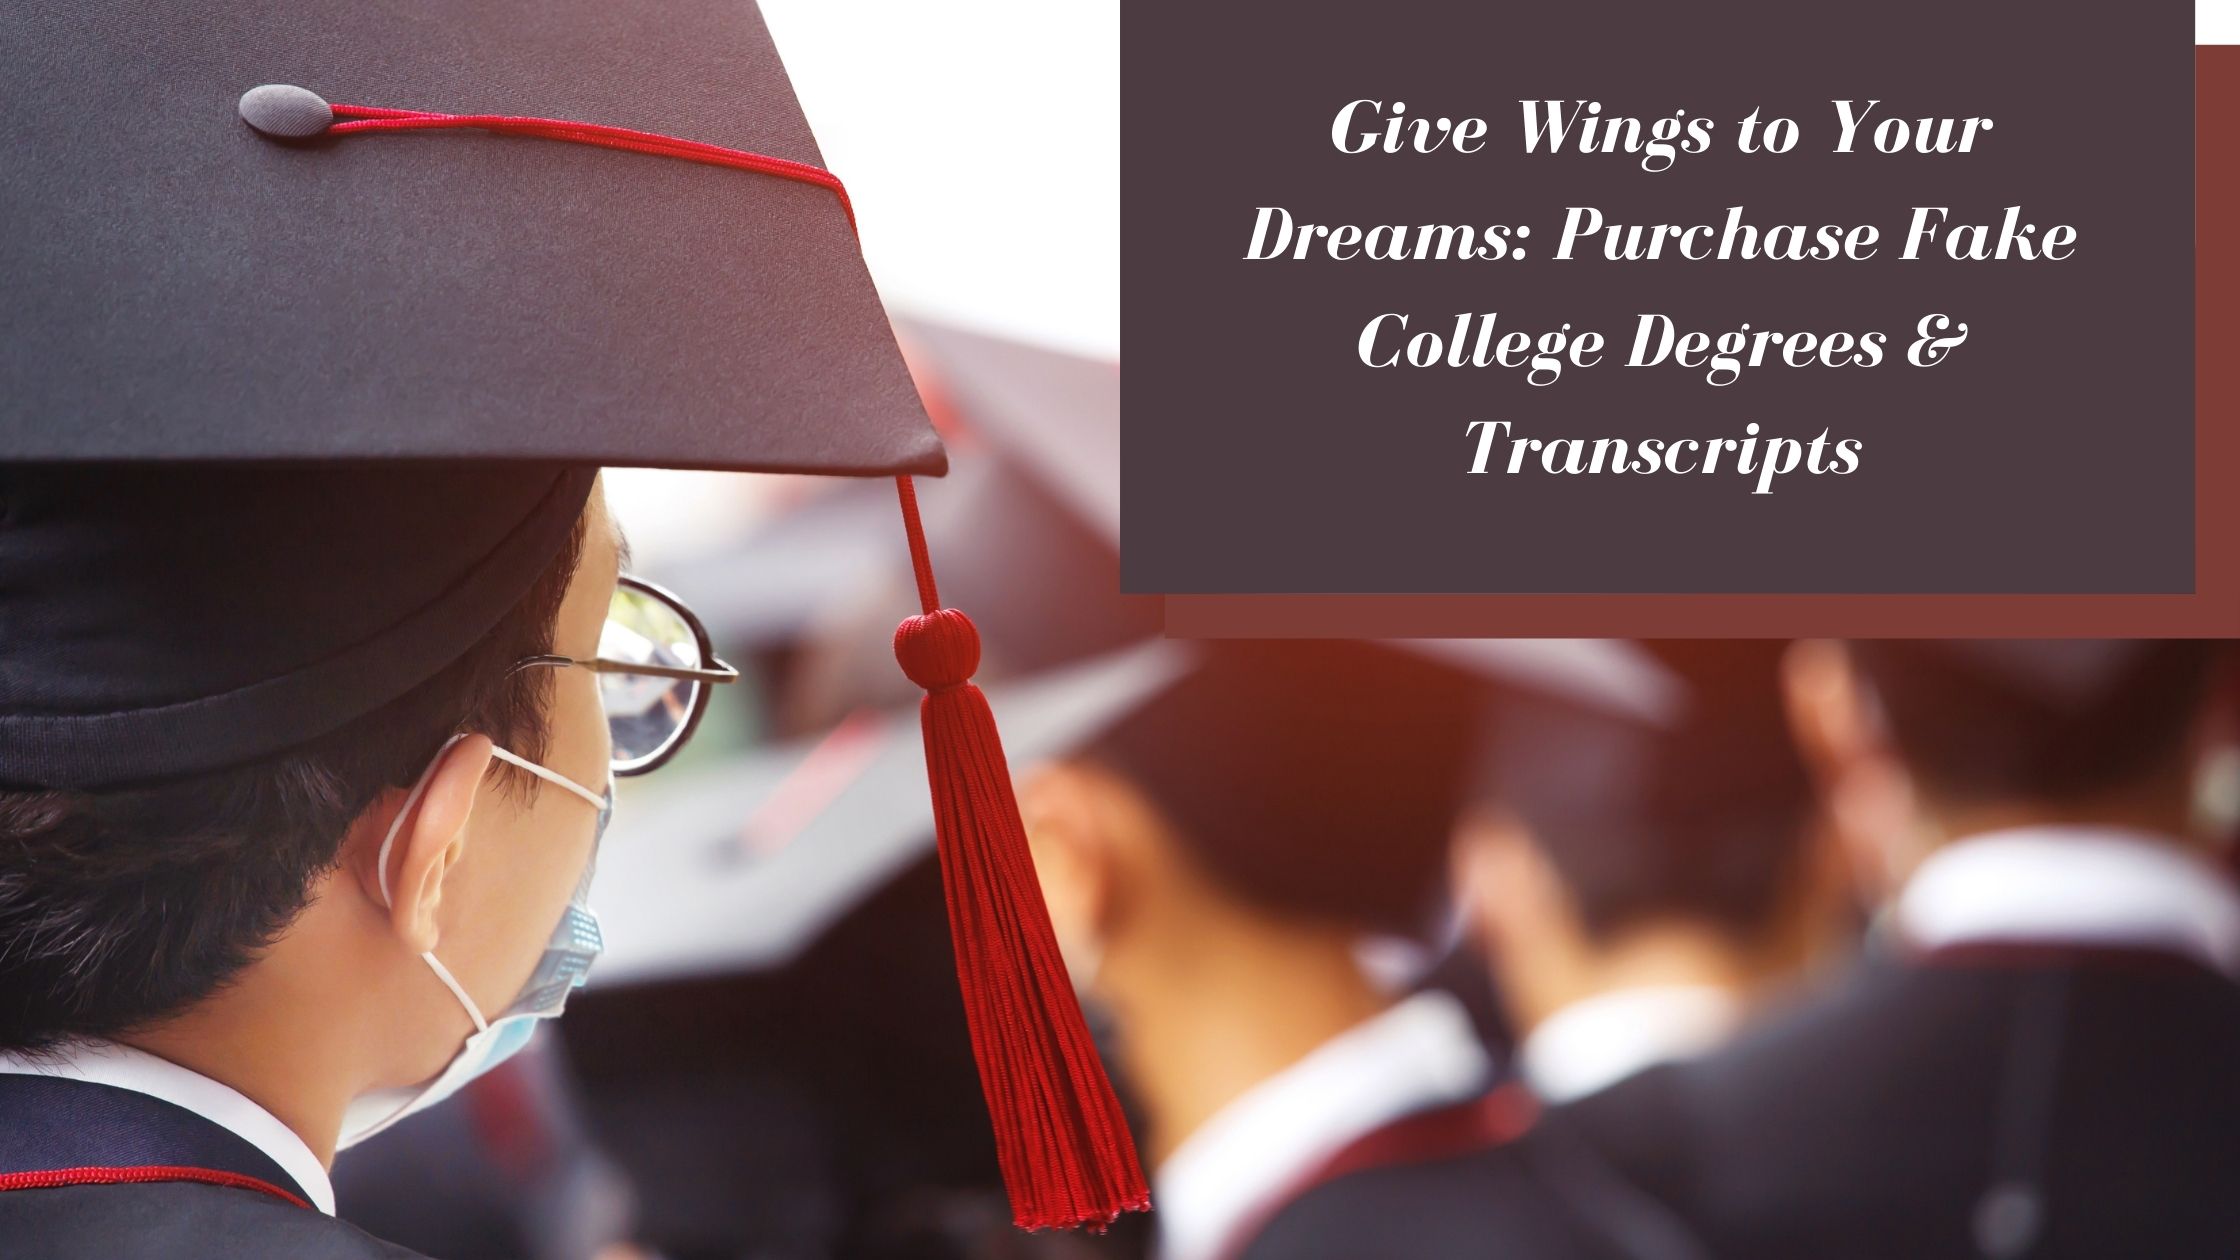 Give Wings to Your Dreams: Purchase Fake College Degrees & Transcripts